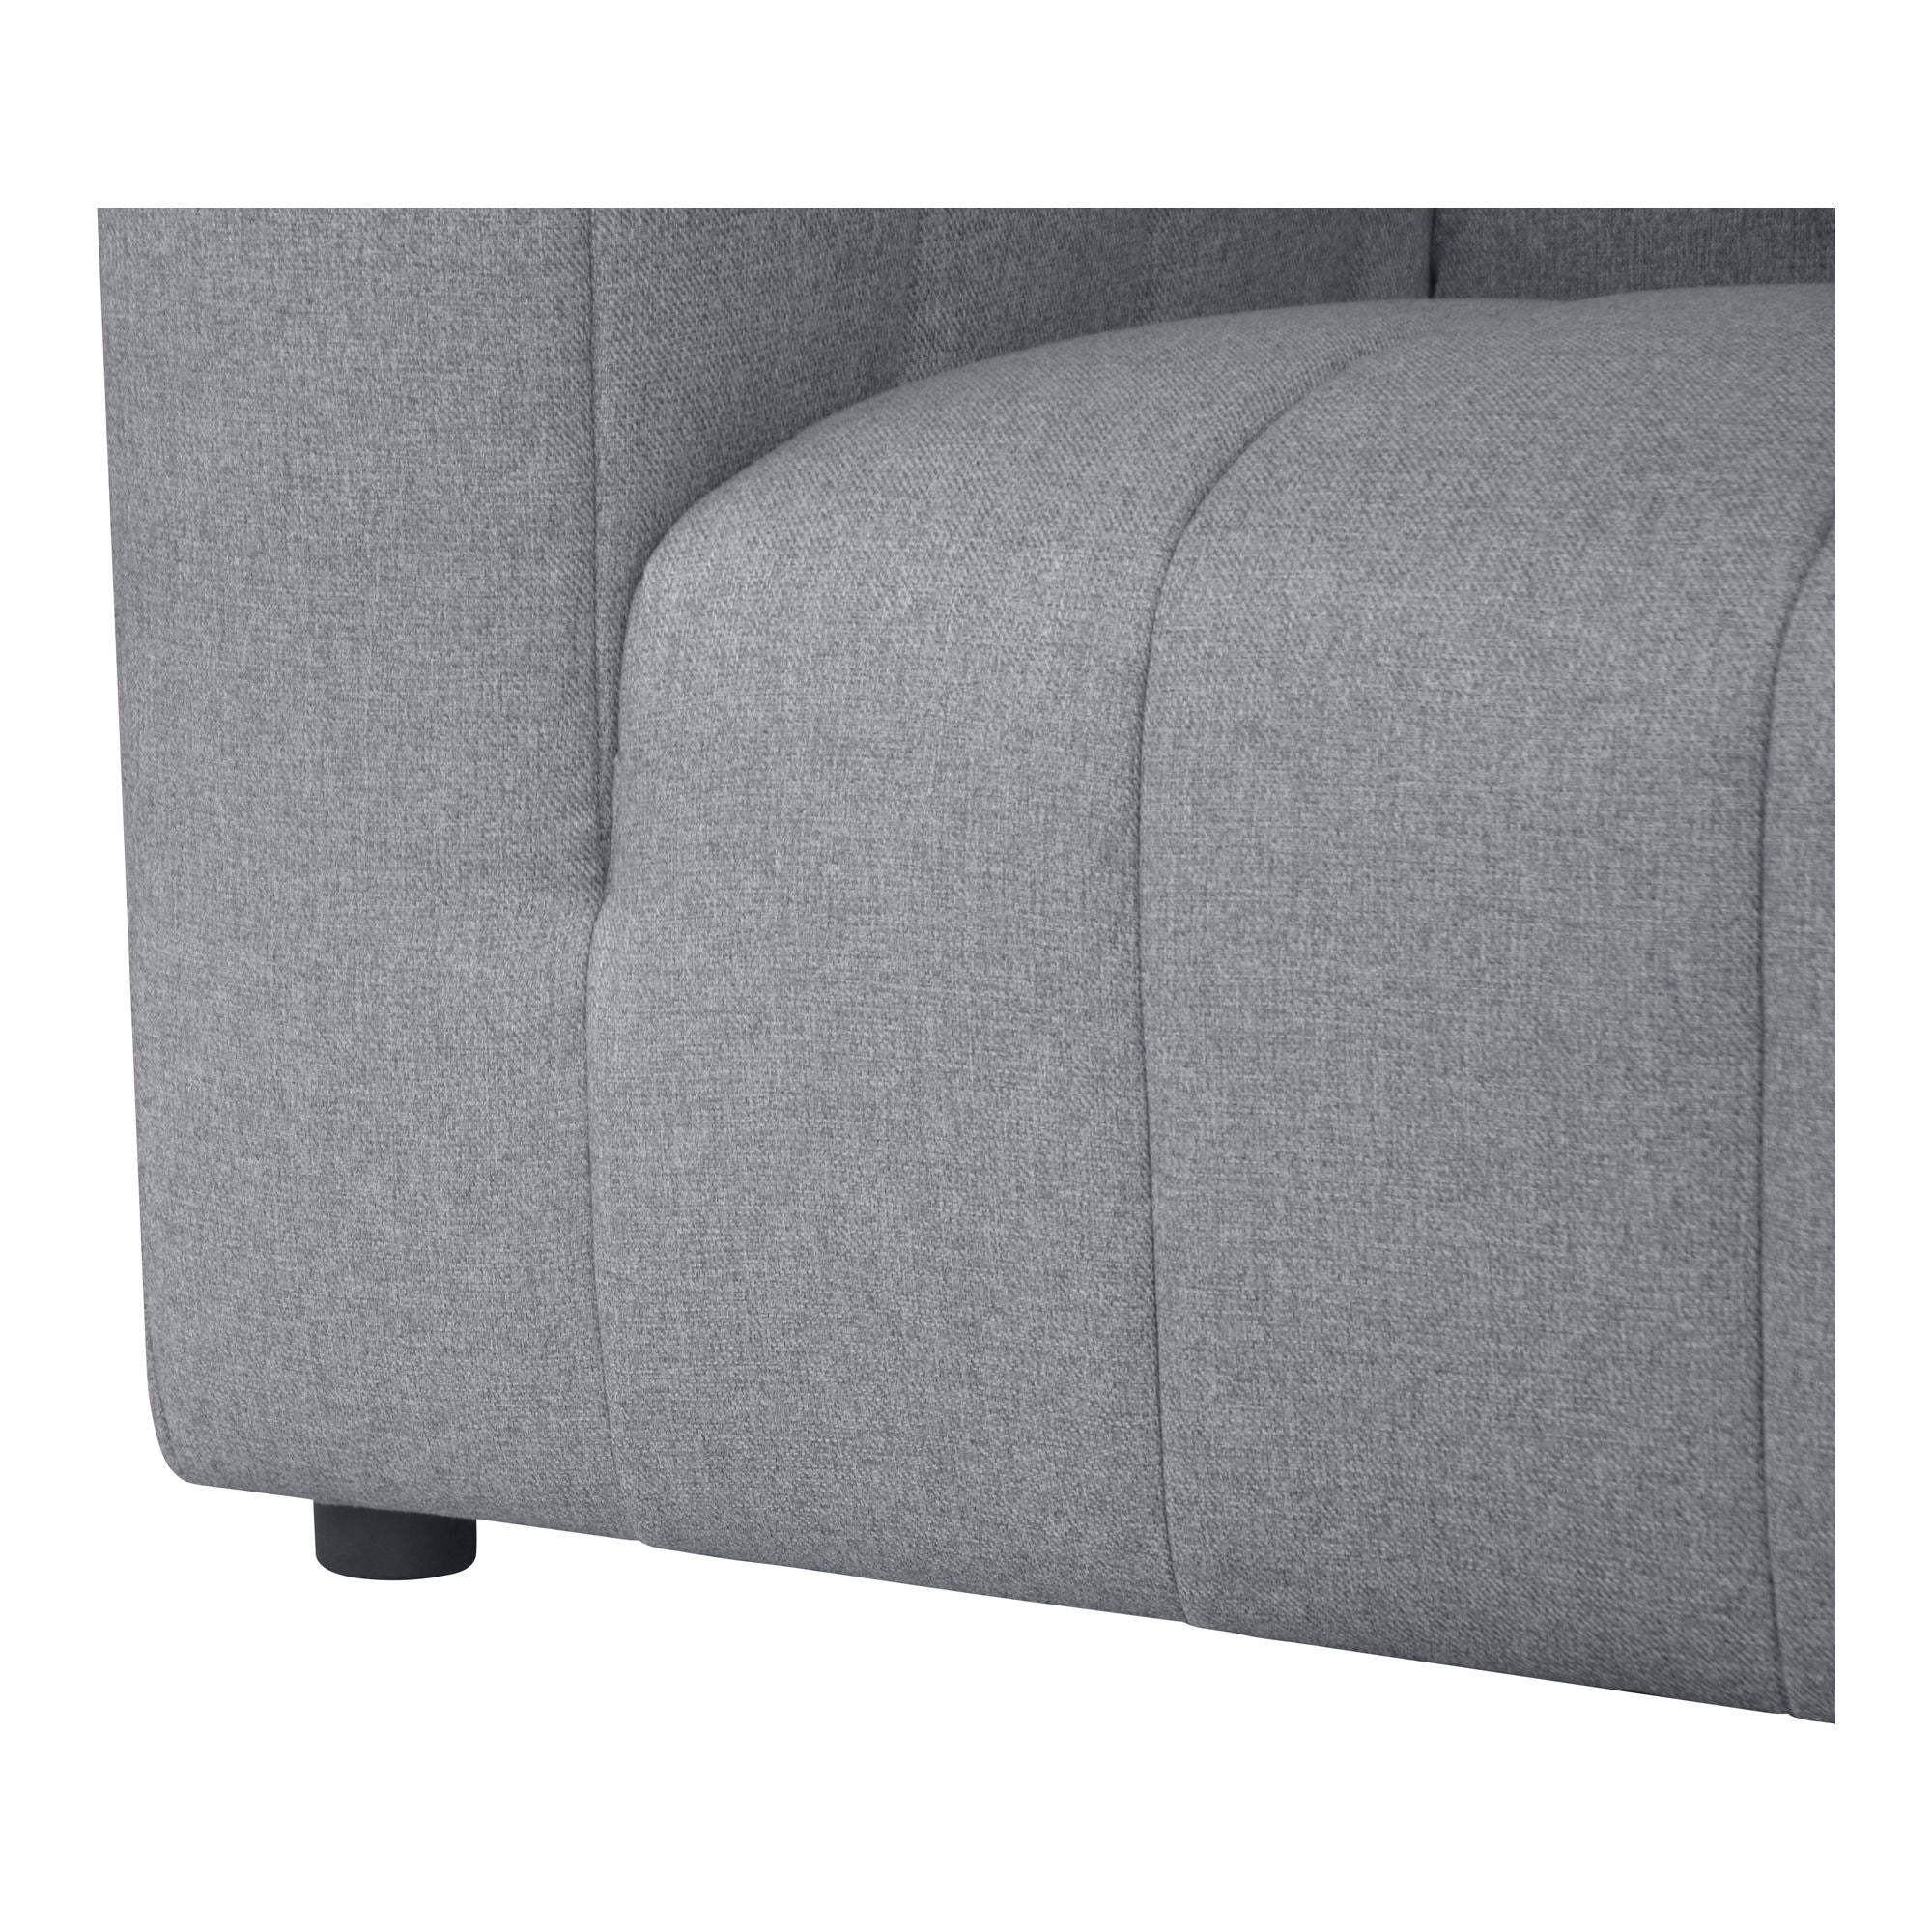 Lyric - Classic L Modular Sectional Grey - Dark Gray-Stationary Sectionals-American Furniture Outlet